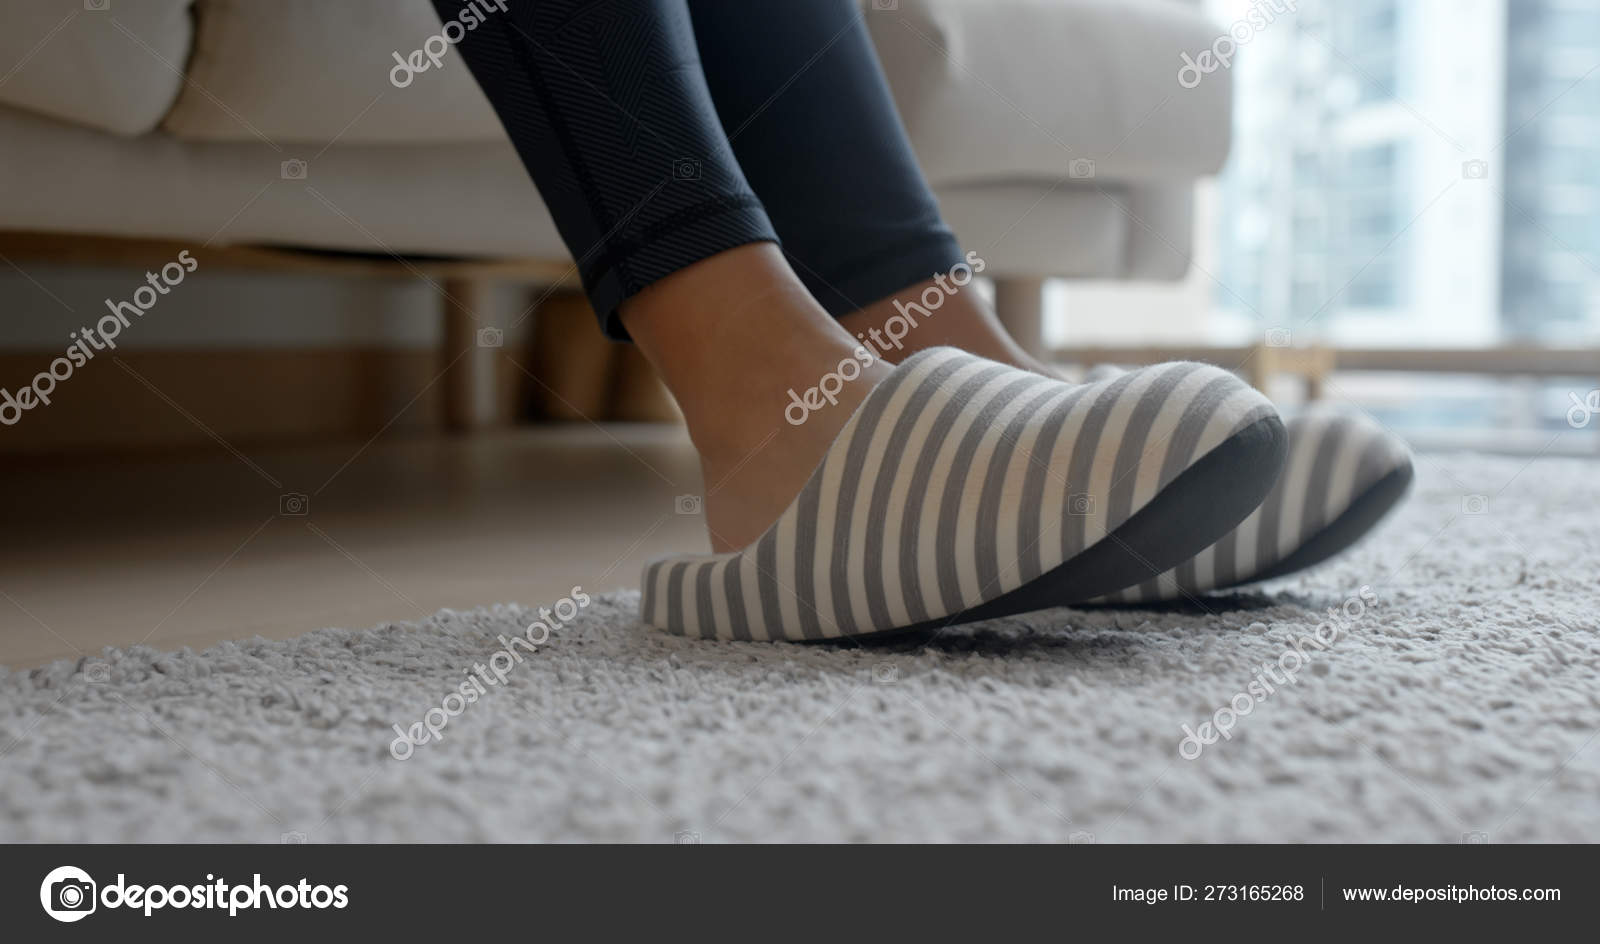 wearing slippers at home